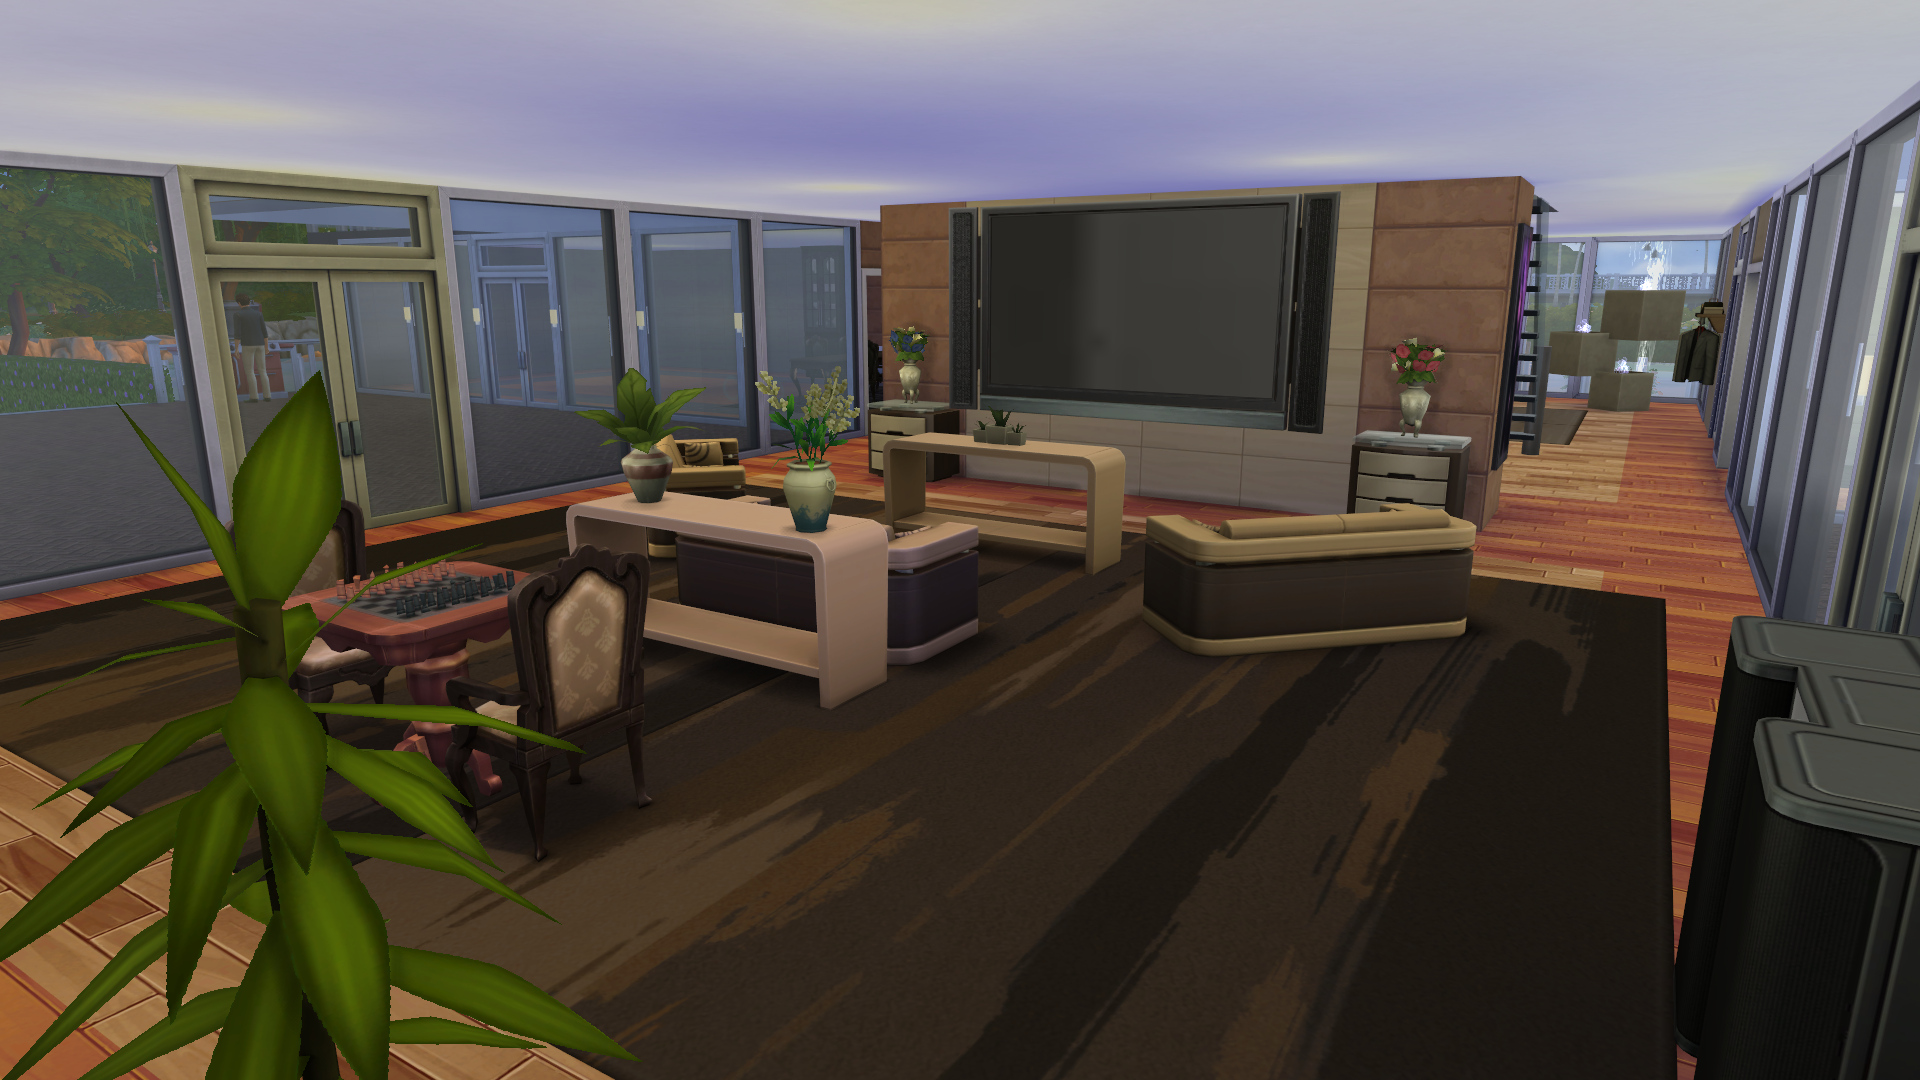 Verwachting emulsie Wetenschap Mod The Sims - Reflections A large Modern spacious Mansion 4 bed 5 Bathrooms